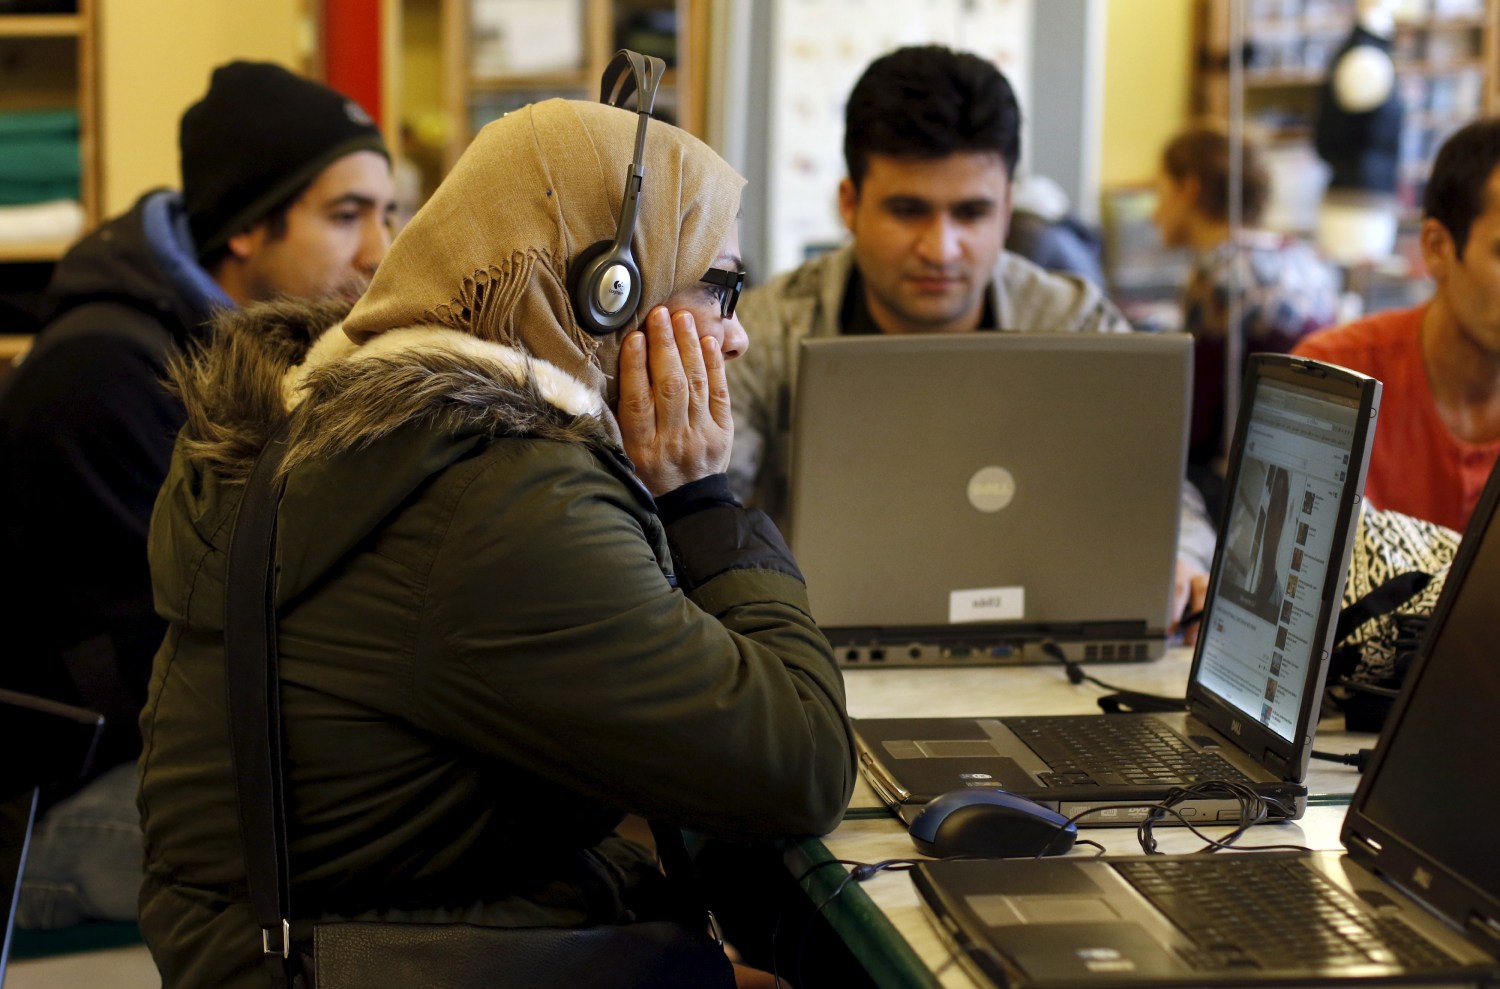 Migrants learn German on laptops at the community centre 'SPIKE Dresden' in Dresden, Germany, March 22, 2016. SPIKE Dresden offers support to refugees and serves as a venue for people under 30 to meet at. REUTERS/Ina Fassbender - GF10000356259